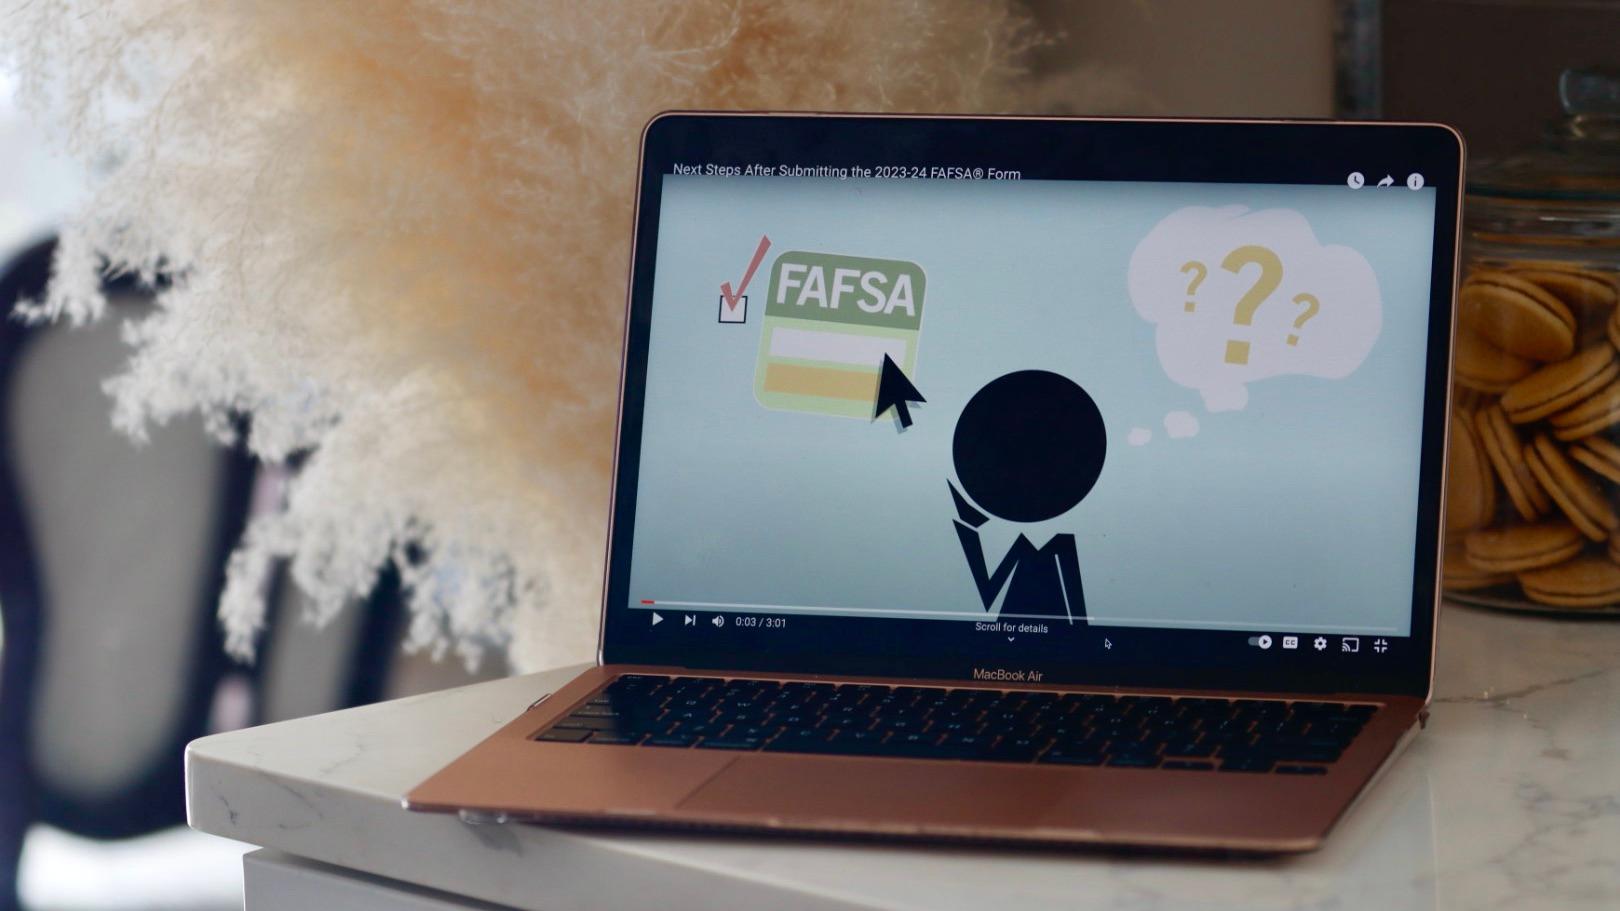 Image of YouTube video talking about FAFSA